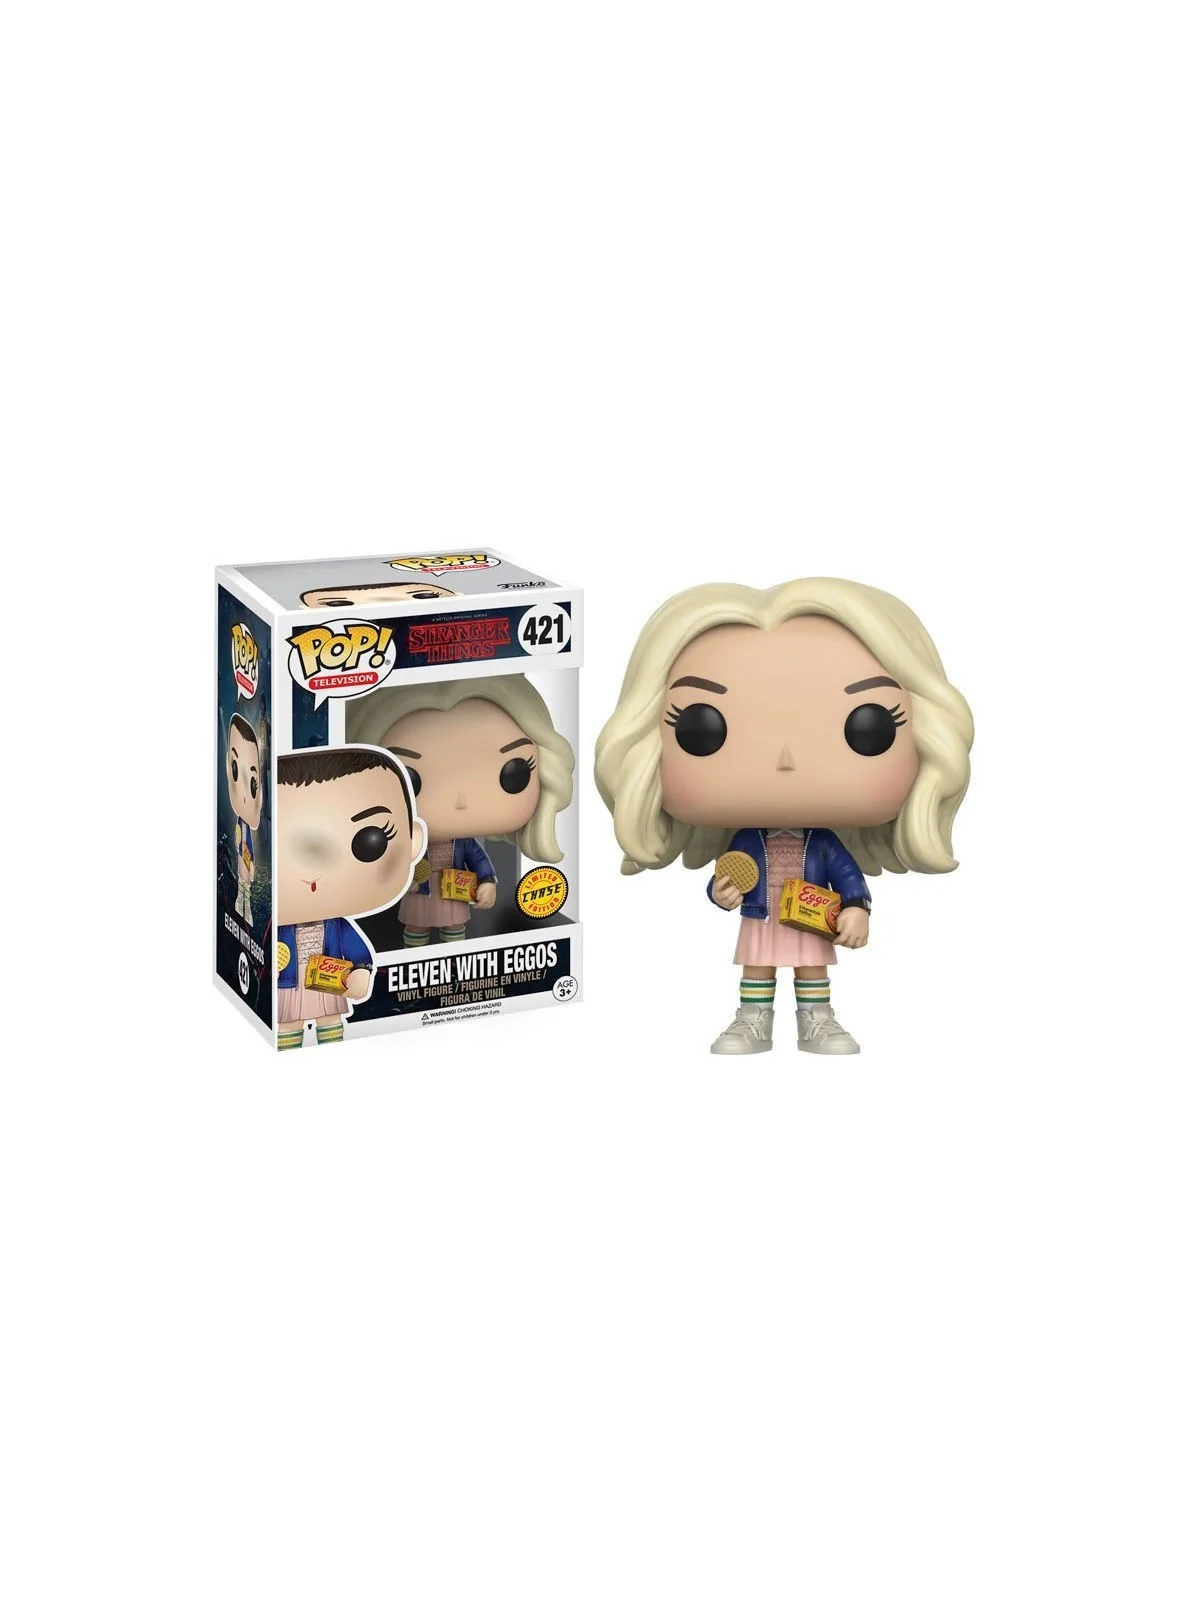 Comprar Funko POP! Stranger Things Eleven with Eggos Chase (421) barat